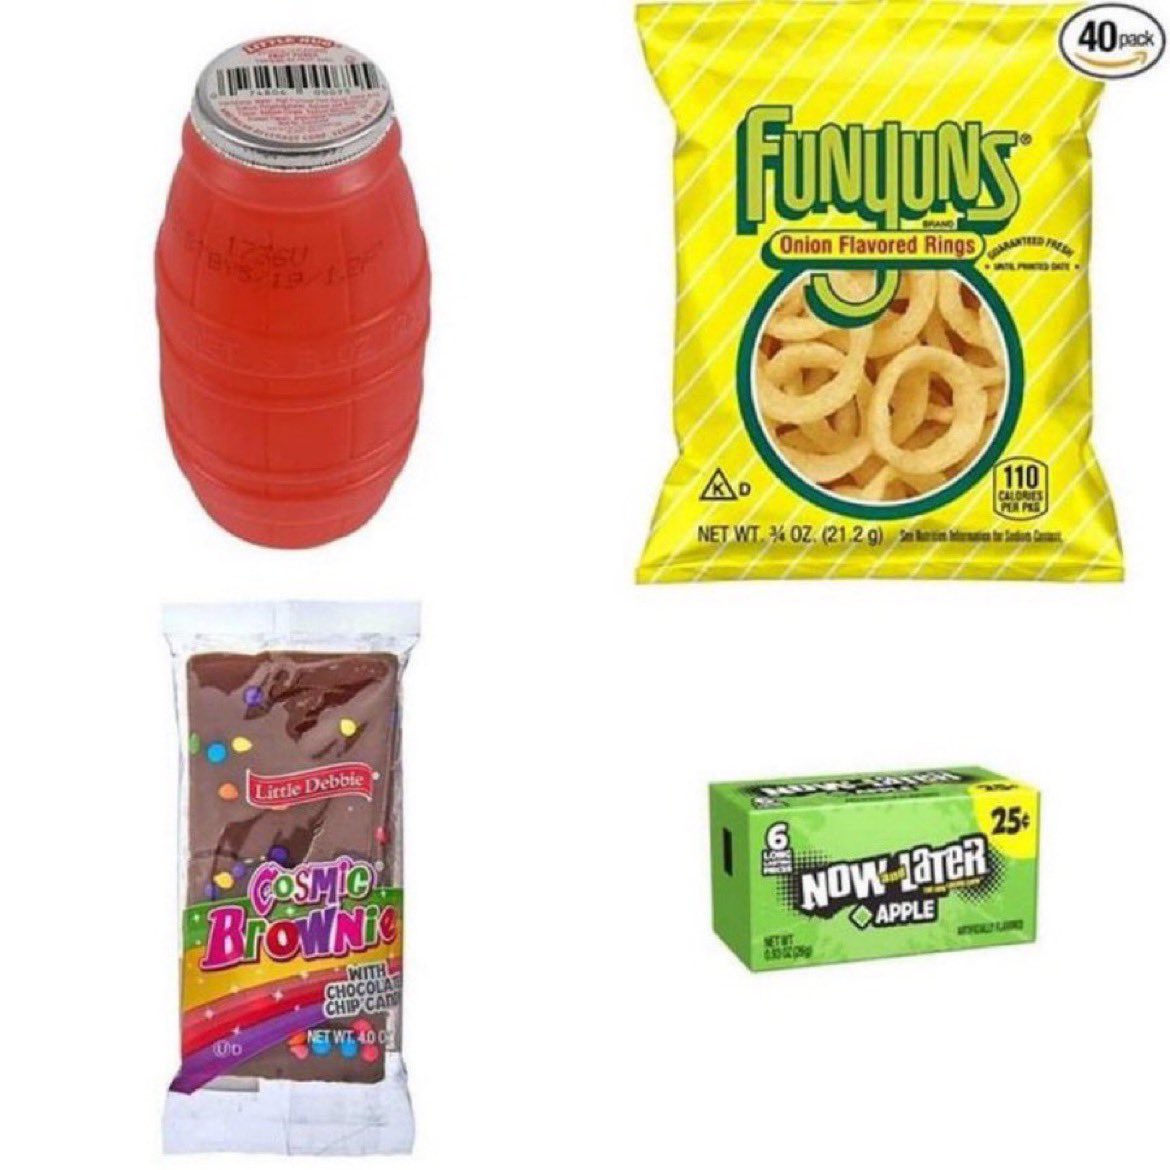 crazy how back in the day all of this used to cost you $1.00